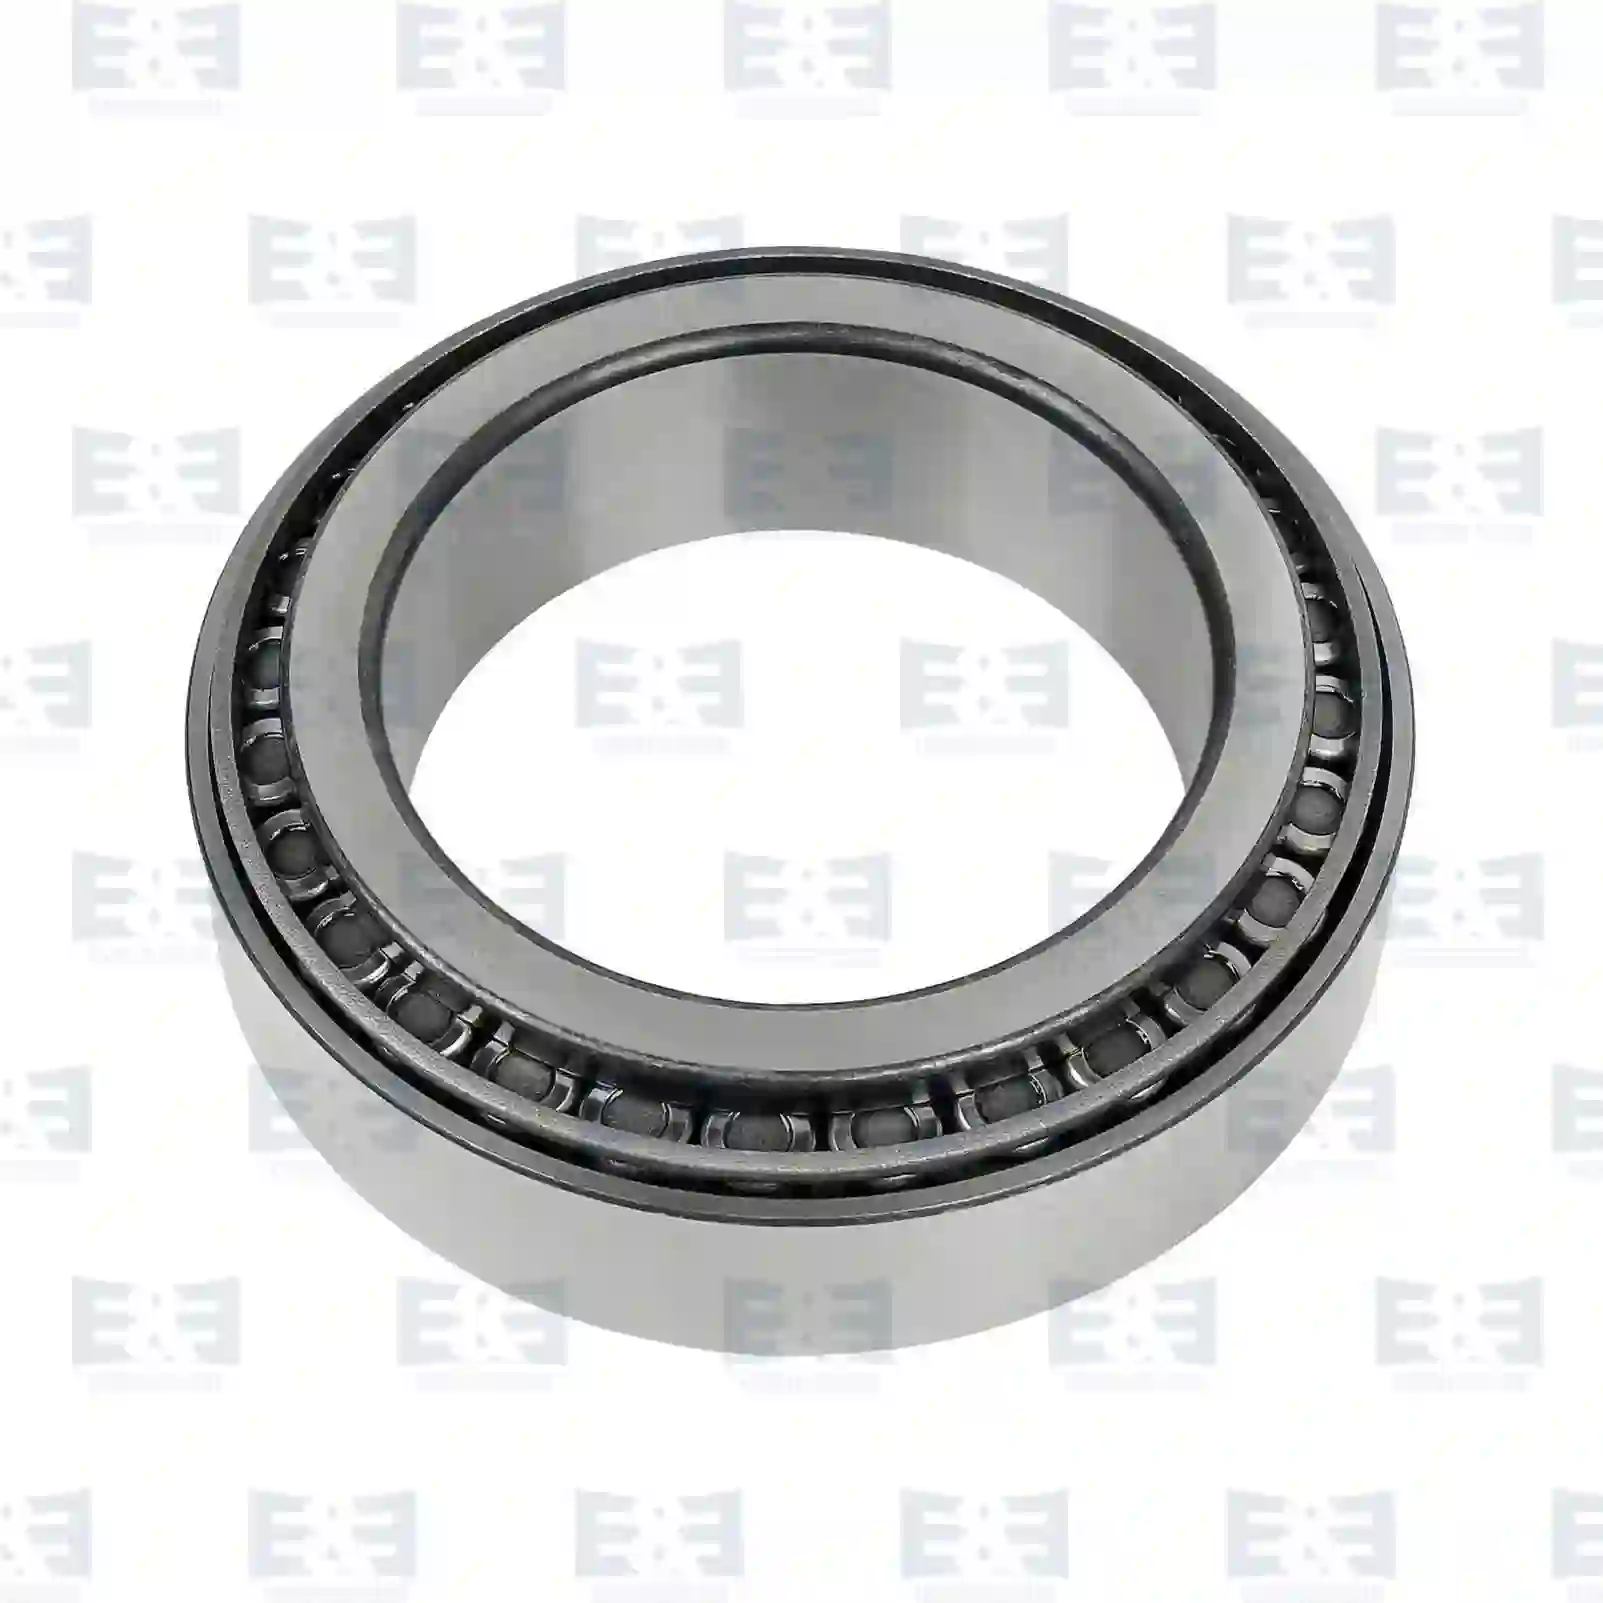 Bearings Tapered roller bearing, EE No 2E2286453 ,  oem no:0676988, 1616867, 676988, 01905027, 06324990124, 06324990125, 81934200304, 0019806602, 0059818405, 0059818505, 0069810105, 0149813205, 017063, ZG03024-0008 E&E Truck Spare Parts | Truck Spare Parts, Auotomotive Spare Parts